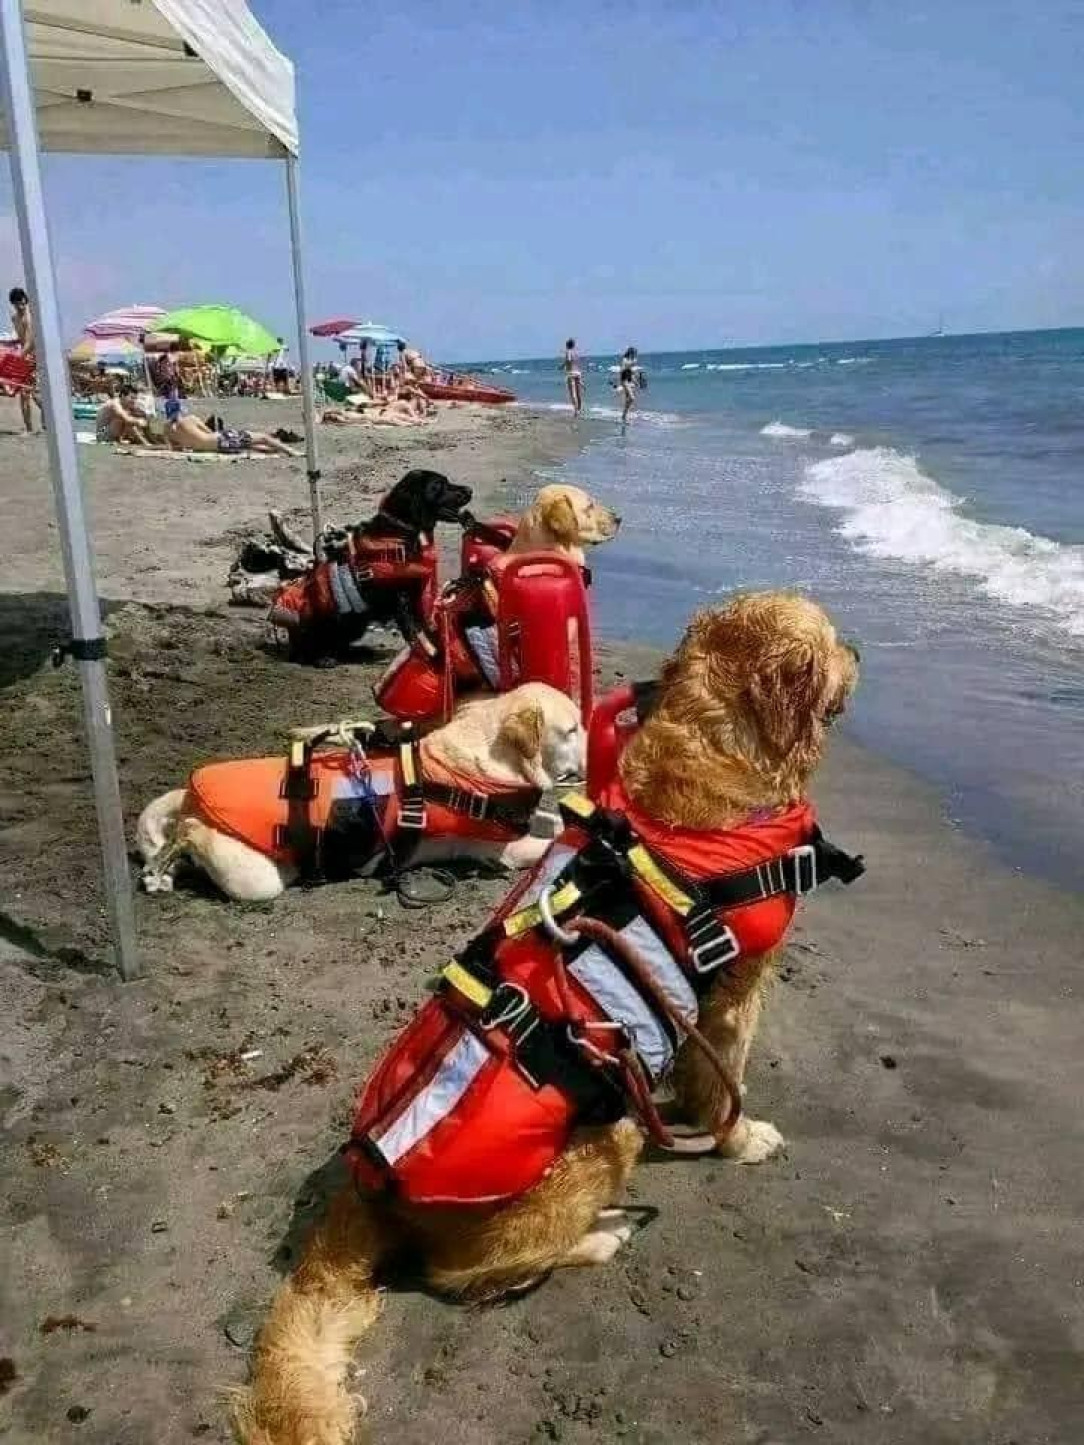 In Croatia they have Dog Lifeguards for the entire Summer season 🐶